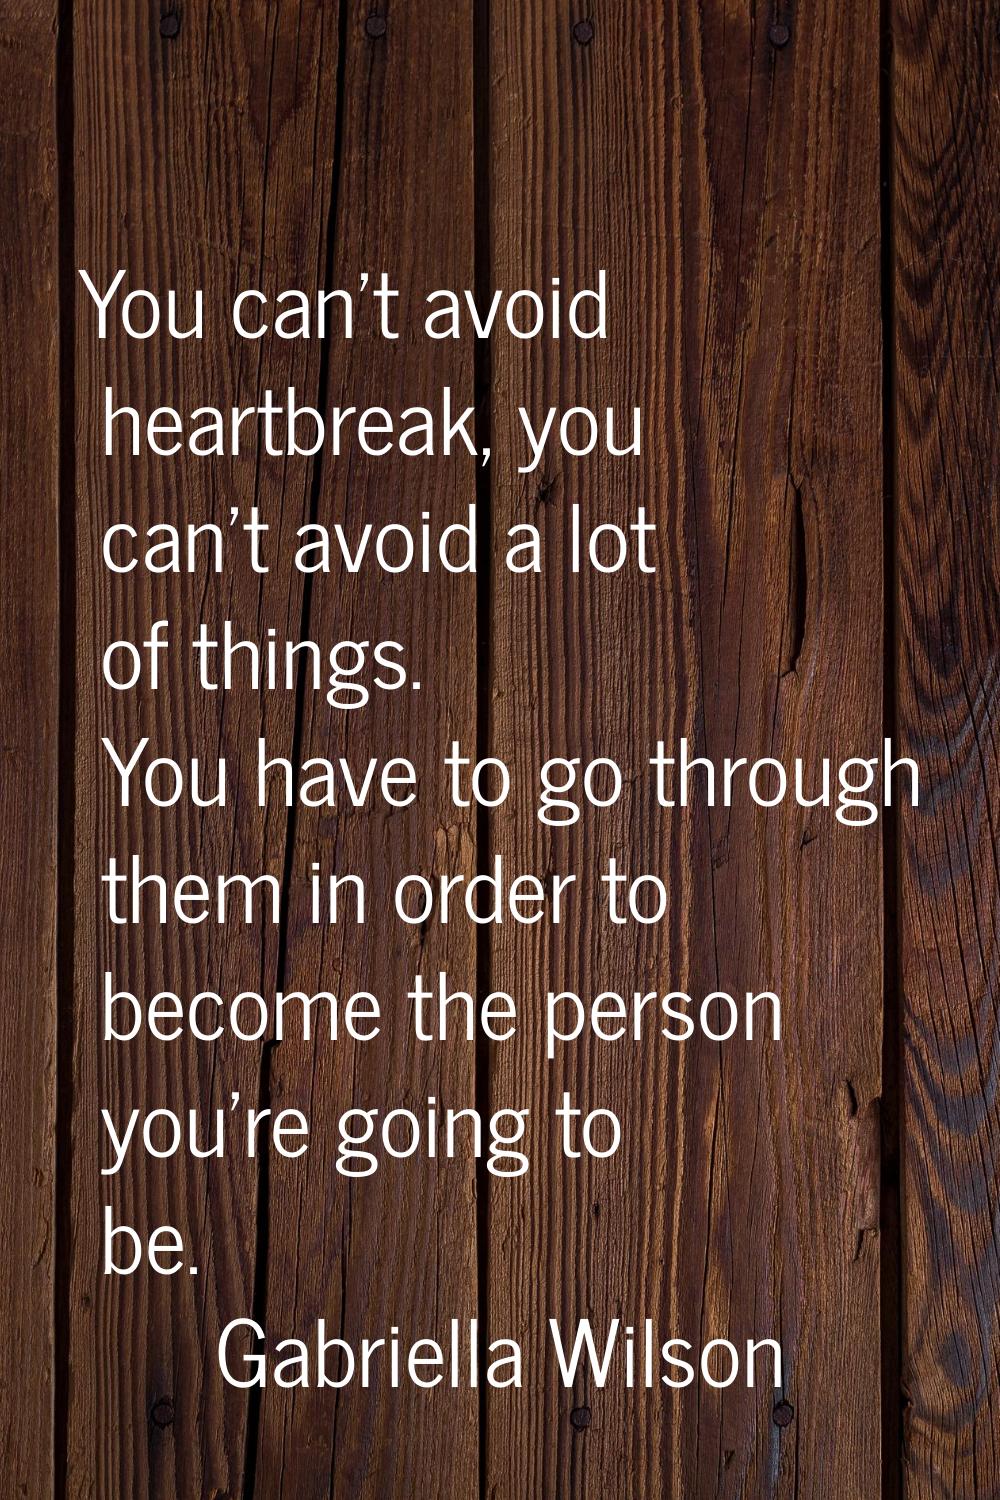 You can't avoid heartbreak, you can't avoid a lot of things. You have to go through them in order t